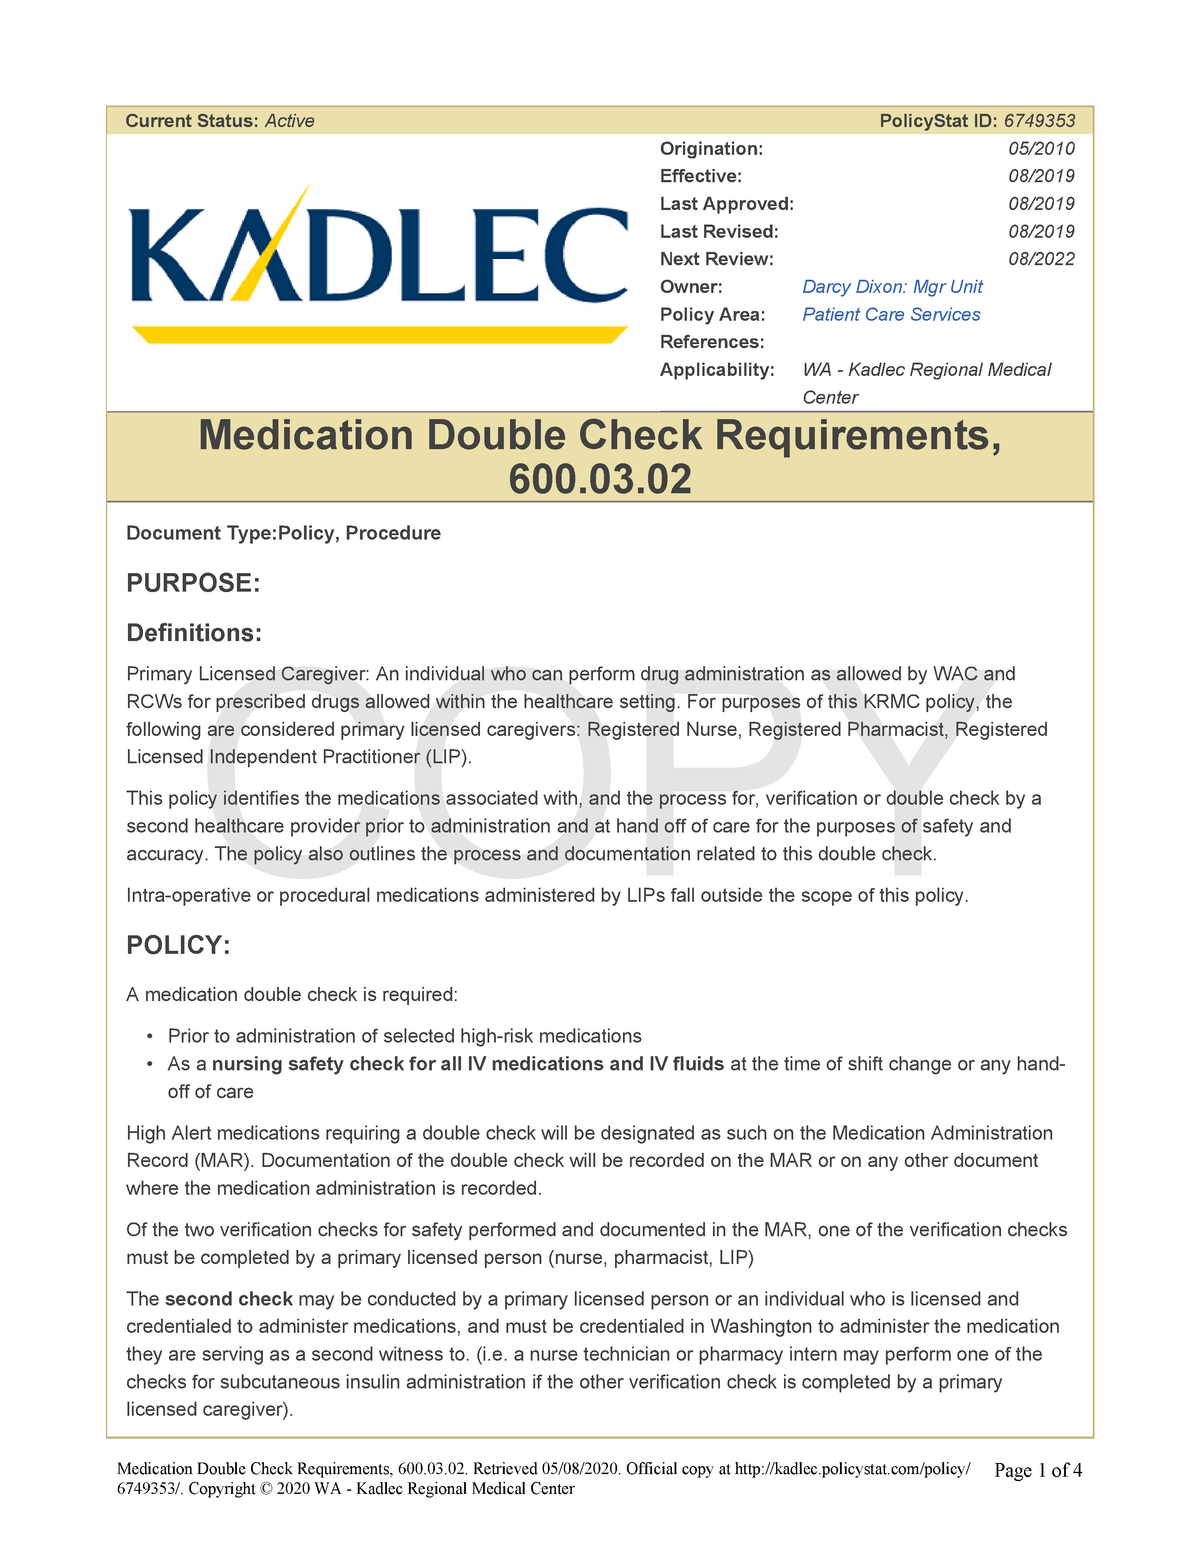 Worth the Risk? Double-Checking High Risk Medication Calculations